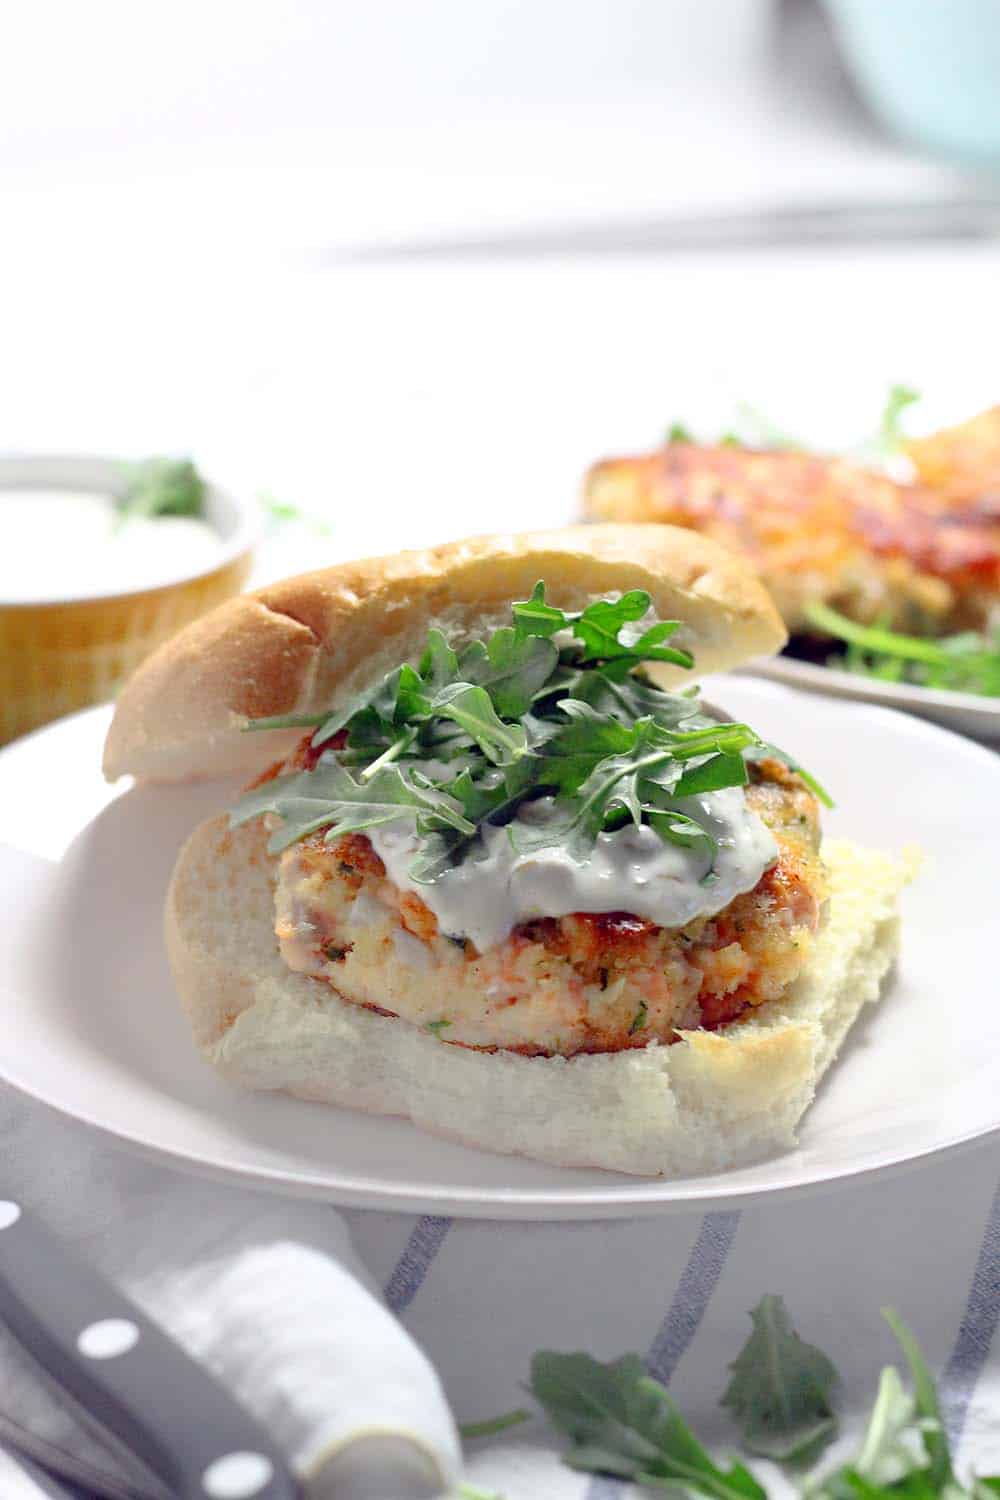 These Salmon Burgers are topped with a Lemon Caper Aioli and are SO easy to make! This recipe is perfect for a healthy alternative to traditional burgers and great for the Lenten season.